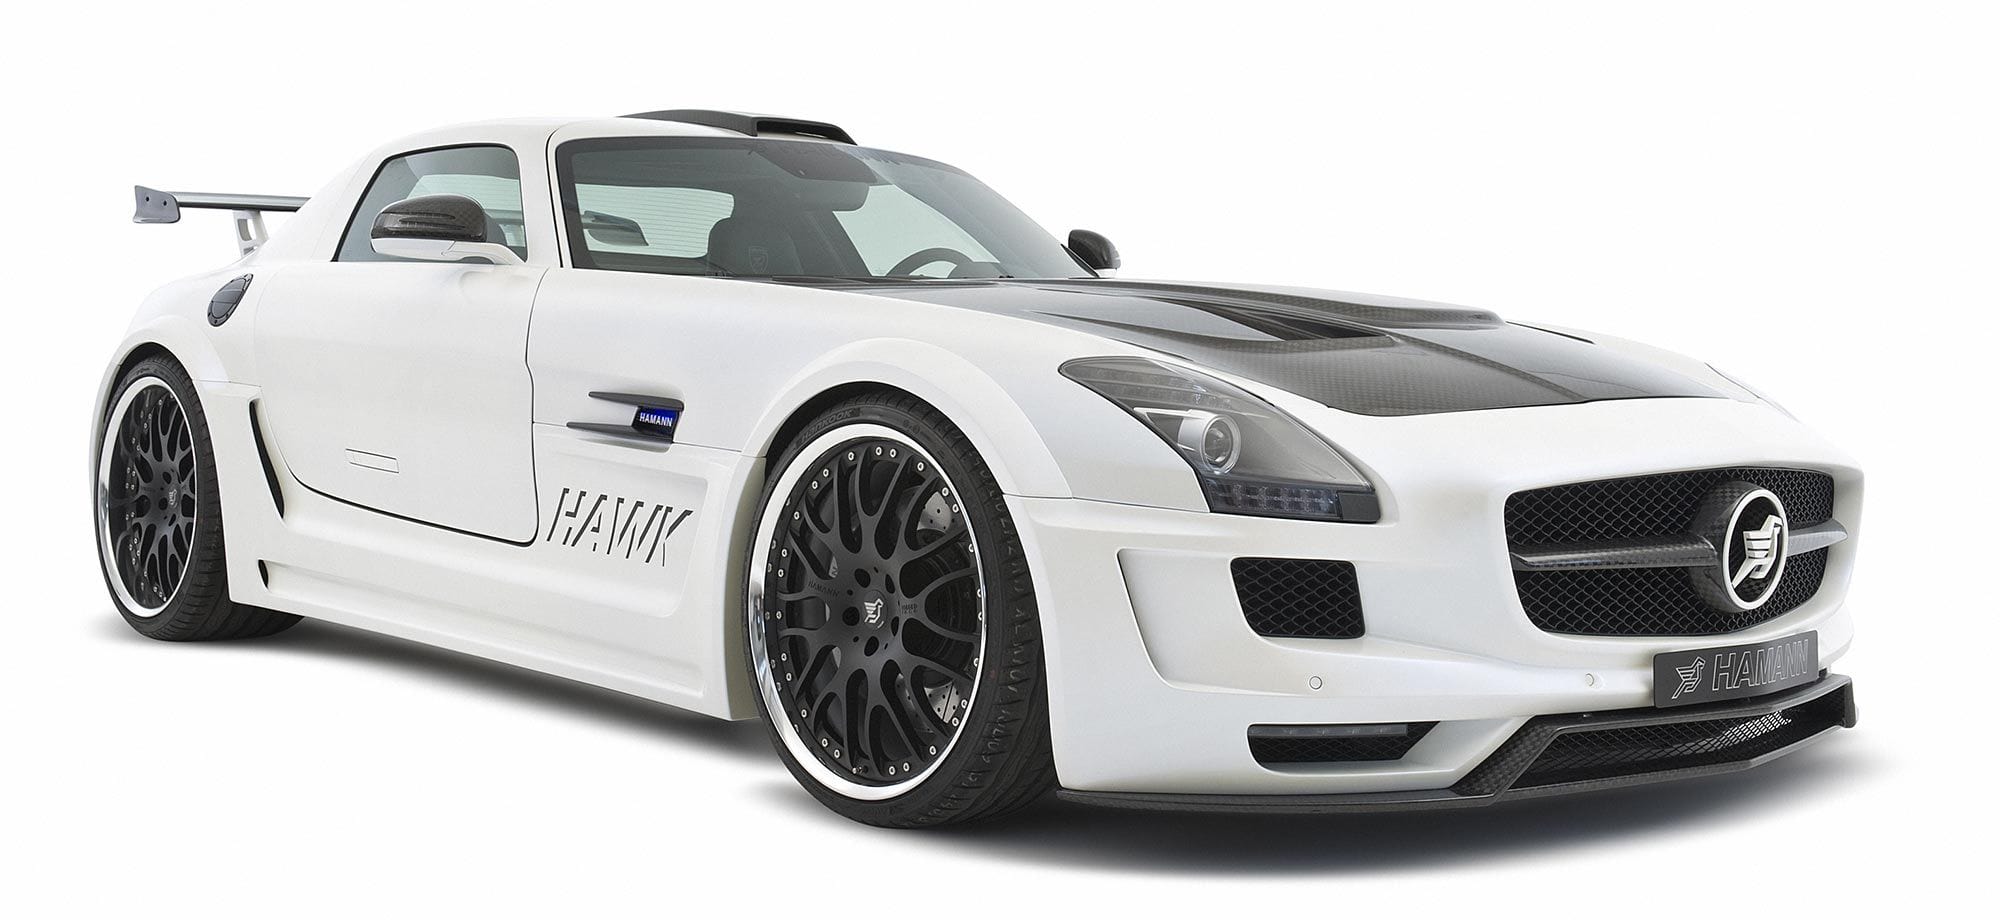 Wheels and Tires/Axles - Hamann Forged EDITION RACE ANODIZED 21 inch wheels for SLS AMG - Used - 2010 to 2014 Mercedes-Benz SLS AMG - 2007 to 2012 Ferrari 599 GTO - 2009 to 2015 Ferrari 458 Italia - London SW11, United Kingdom